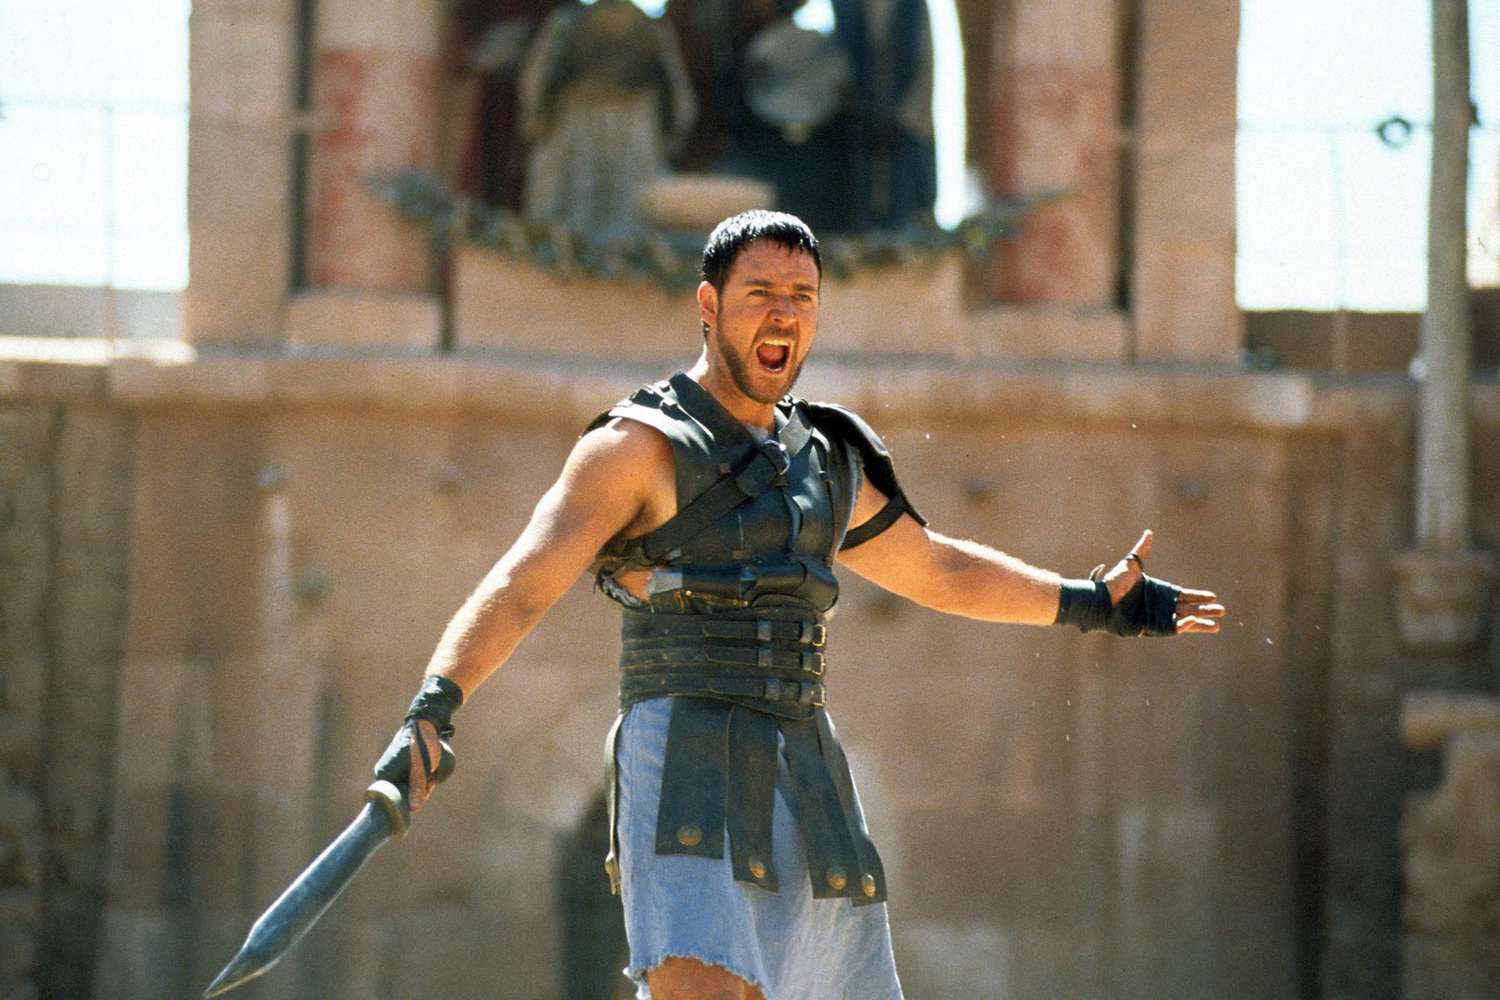 bryan strohl recommends gladiator full movie free pic